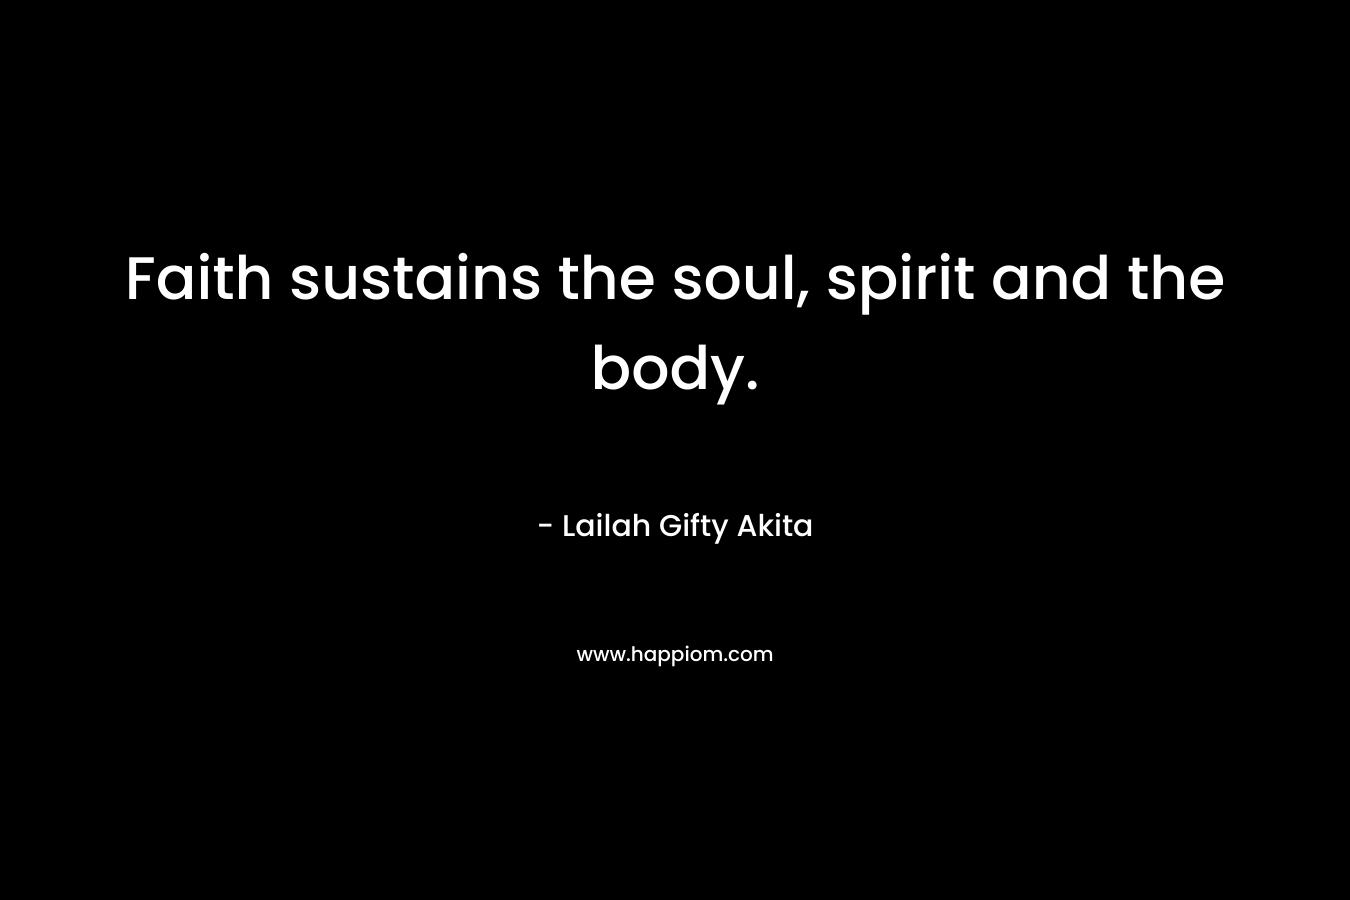 Faith sustains the soul, spirit and the body.